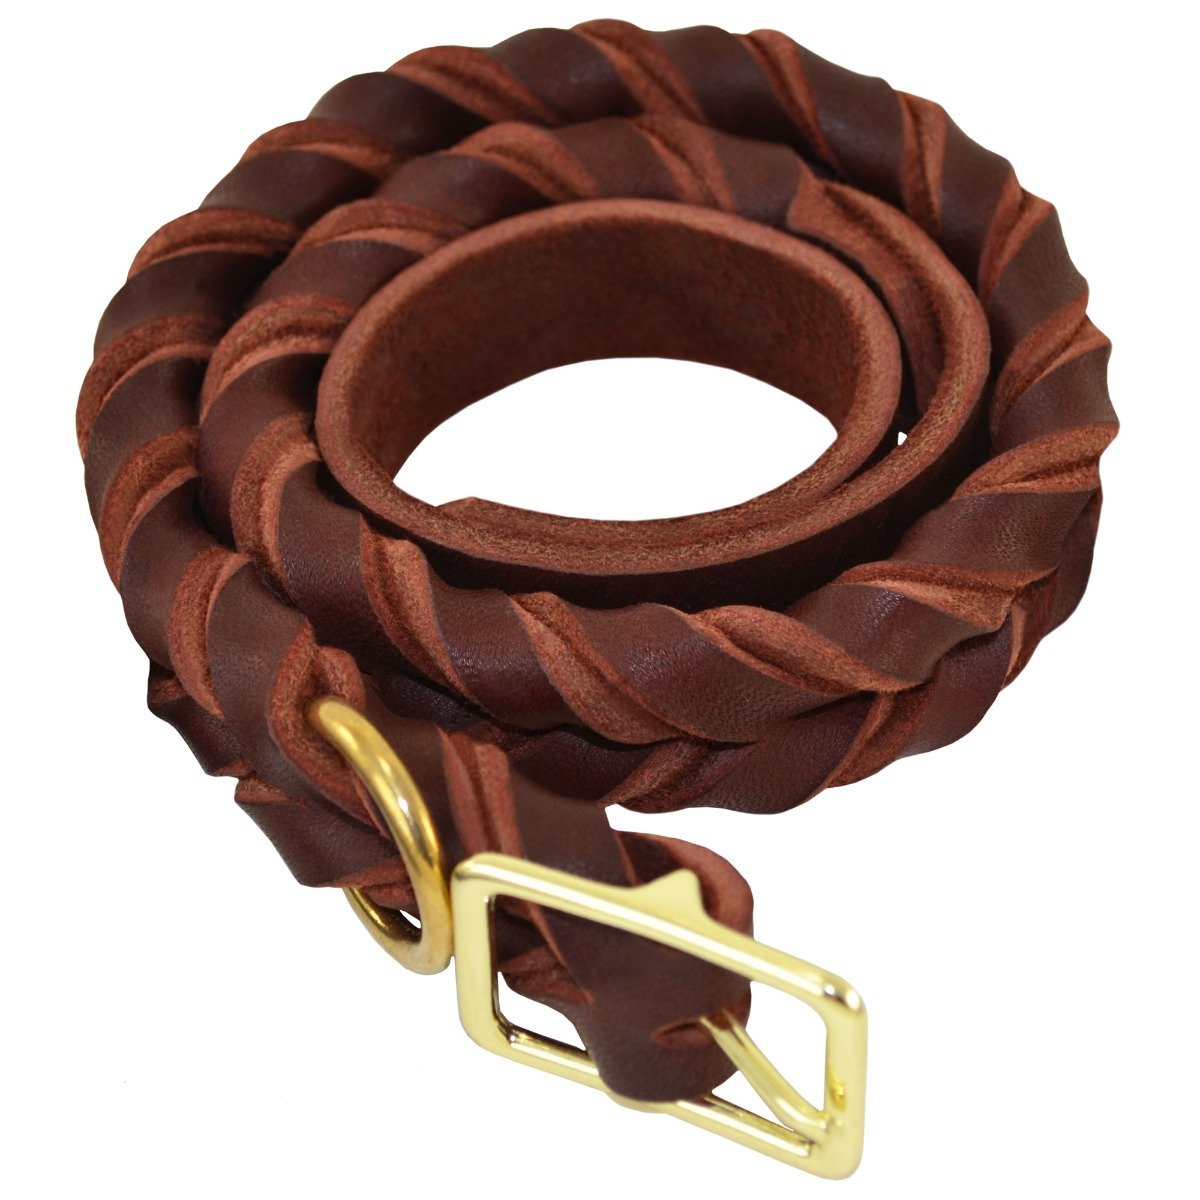 Deluxe Full-Braided Leather Dog Collar - J&J Dog Supplies